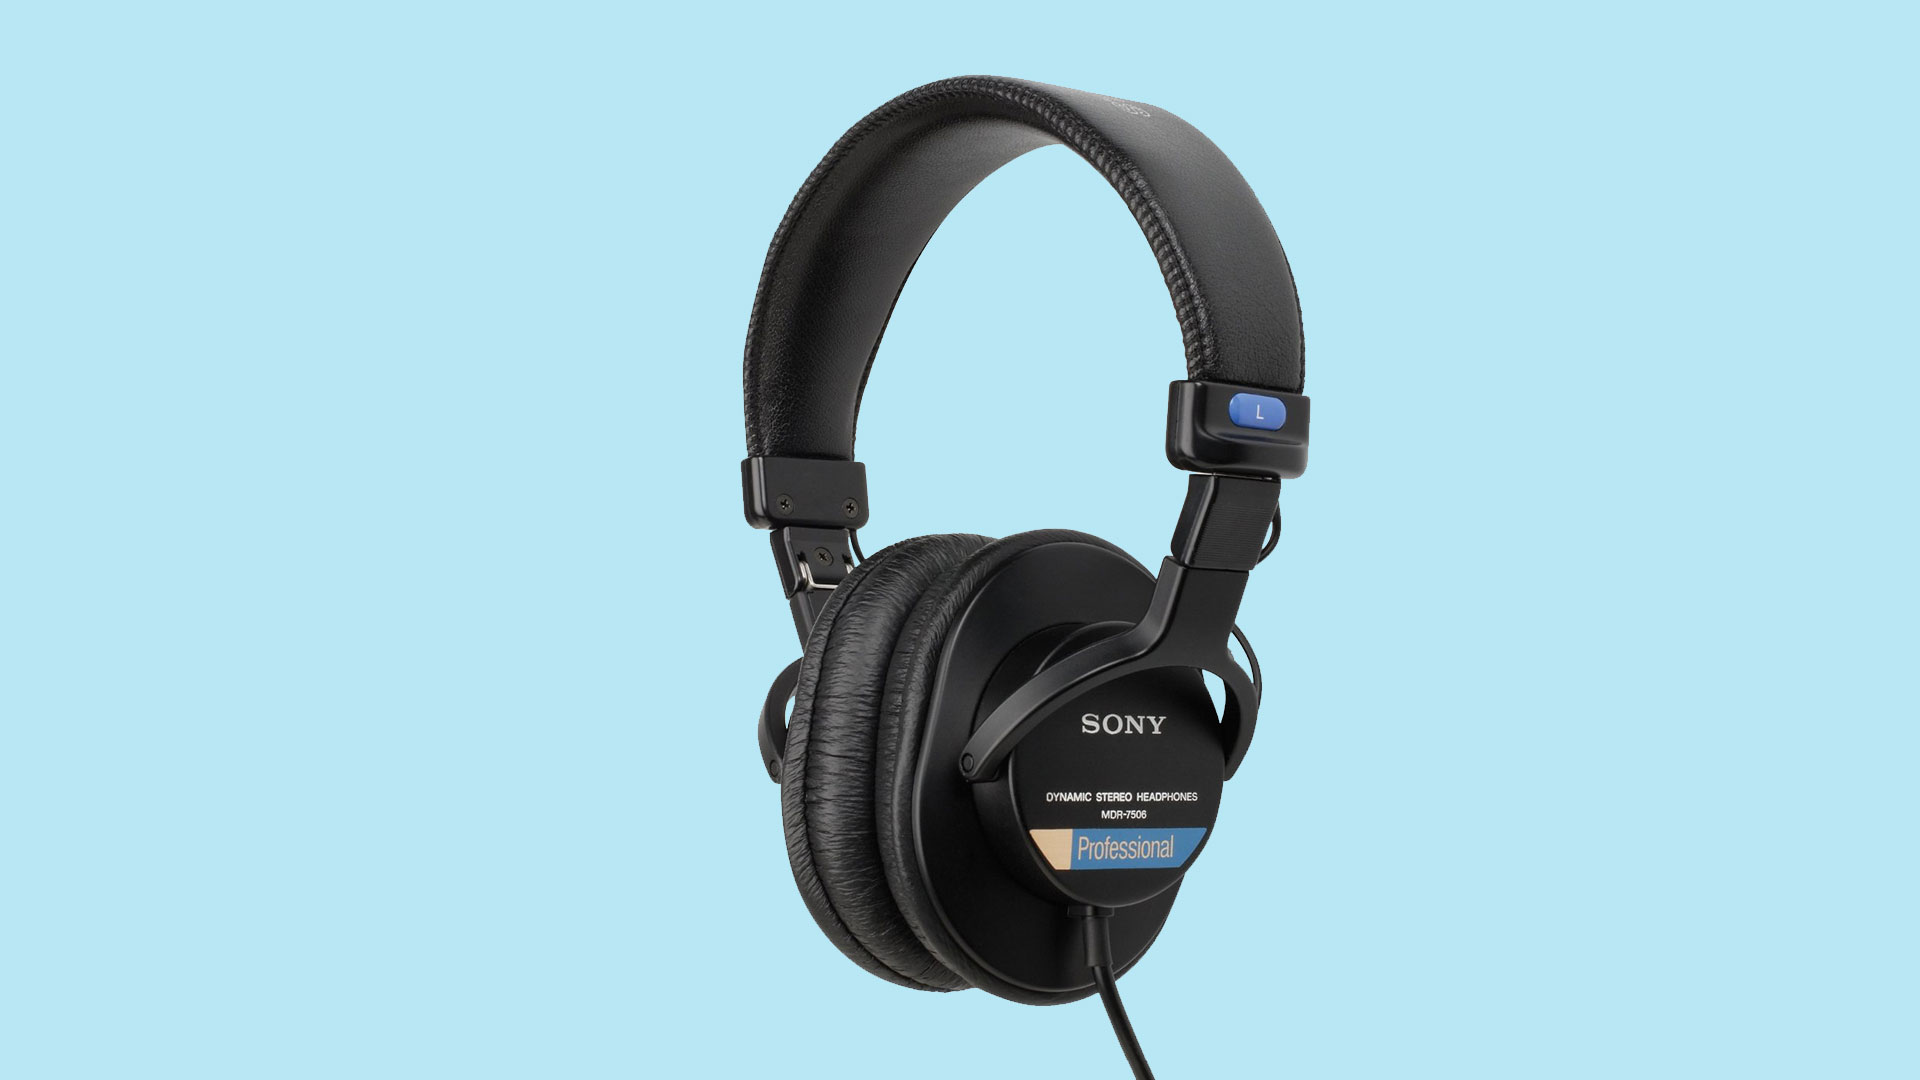 The Sony MDR-7506 is a good pair of headphones for podcasting and studio monitoring.